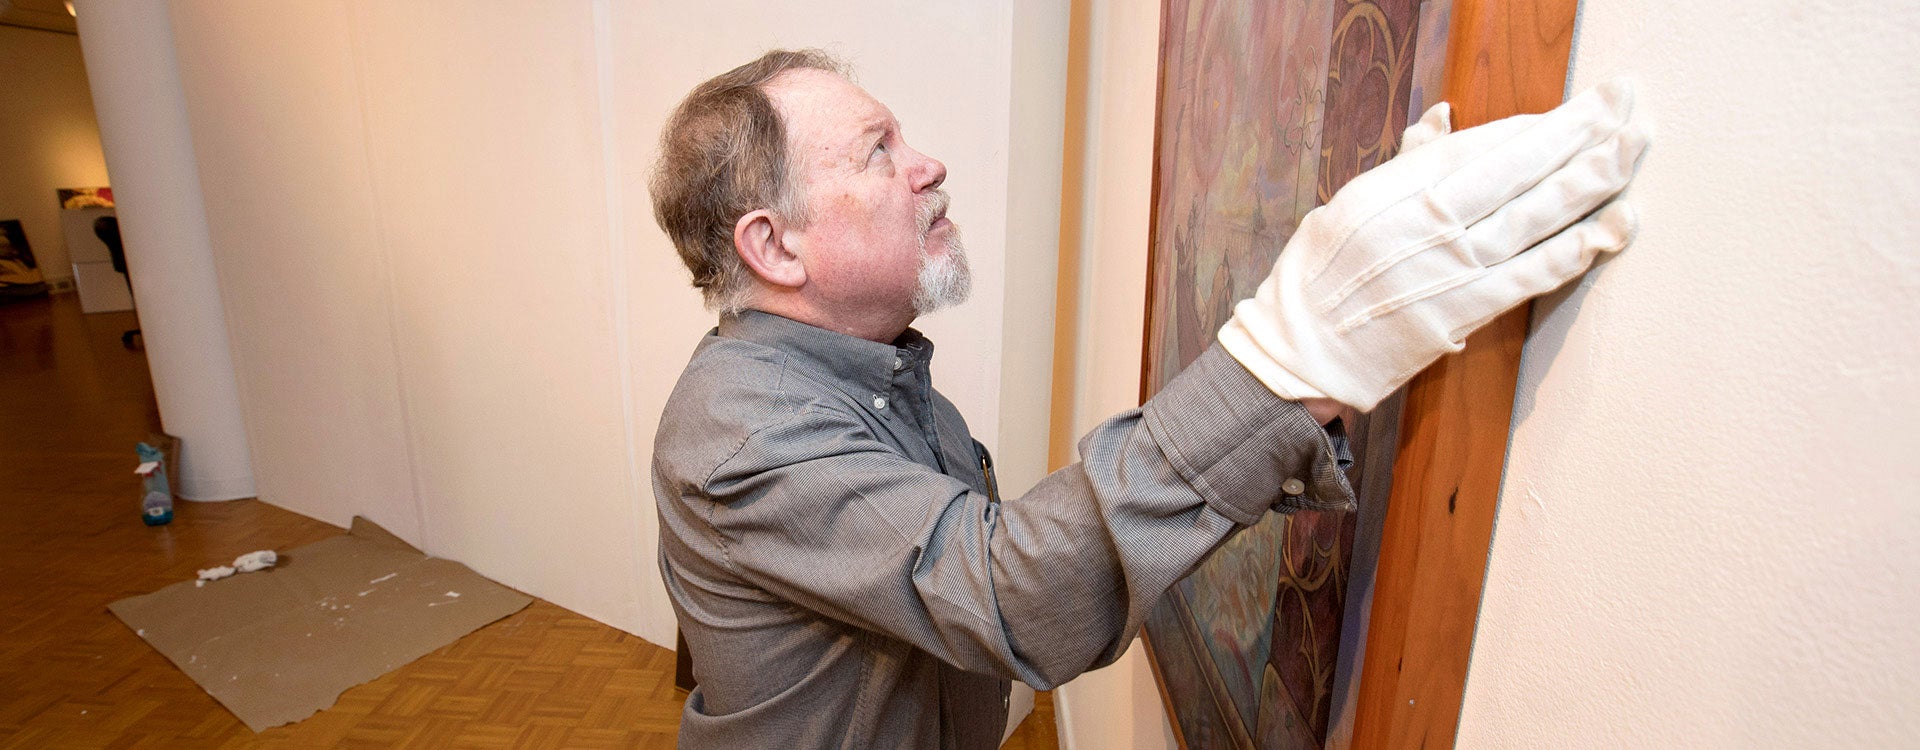 Tom Braswell, interim director of the Wellington B. Gray Gallery, hangs a piece of art in a new exhibit opening May 23. (Photos by Rhett Butler)